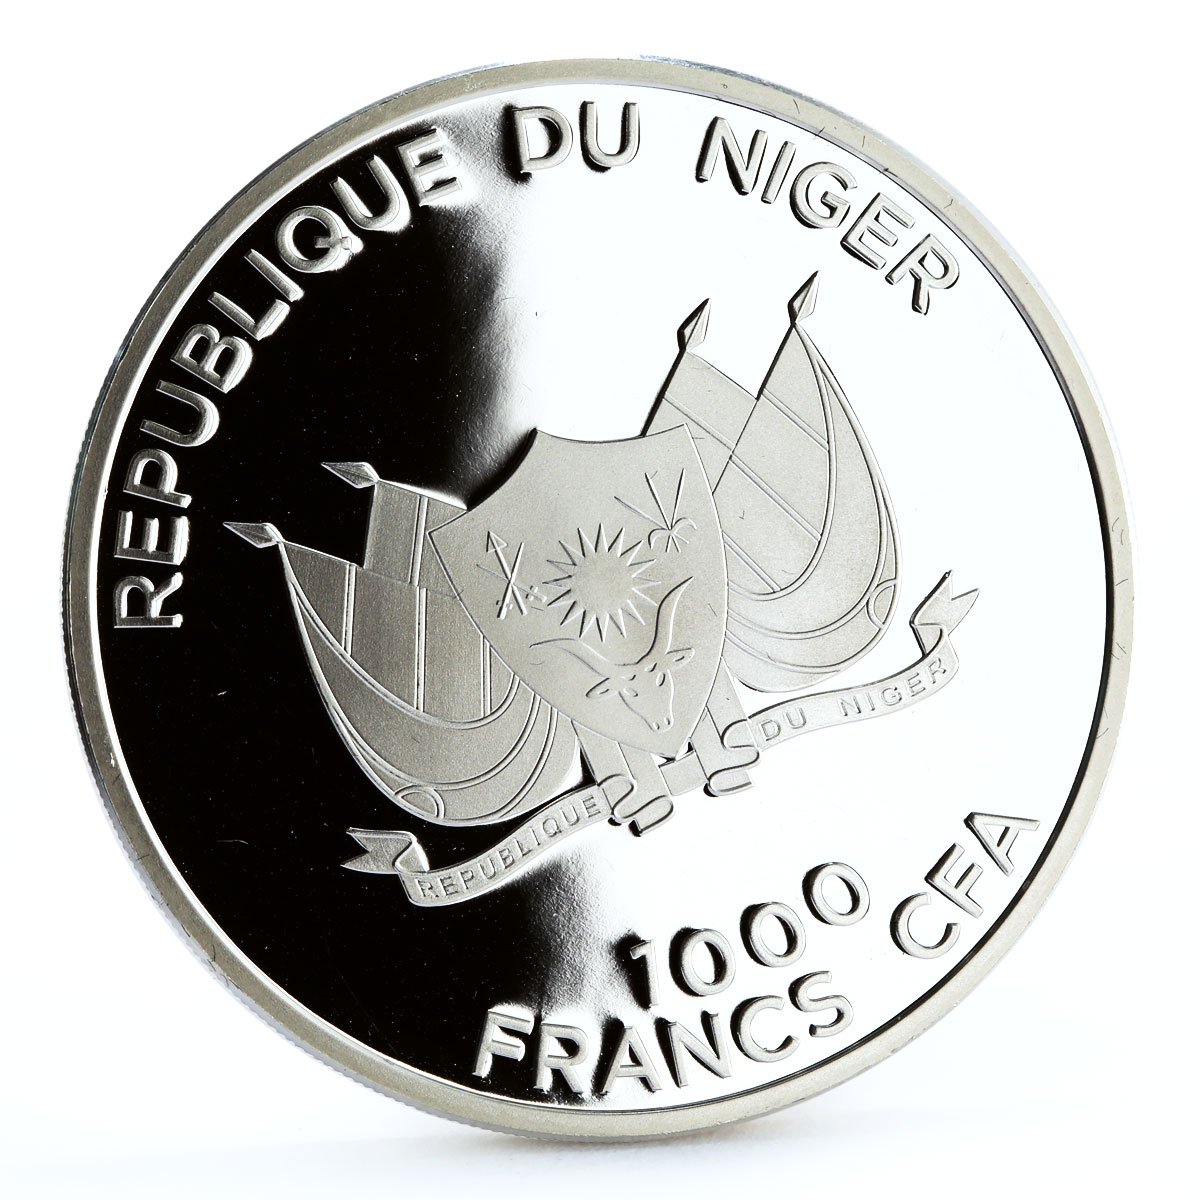 Niger 1000 francs Mecca Kaaba Qibla Compass Islam Religion silver coin 2012